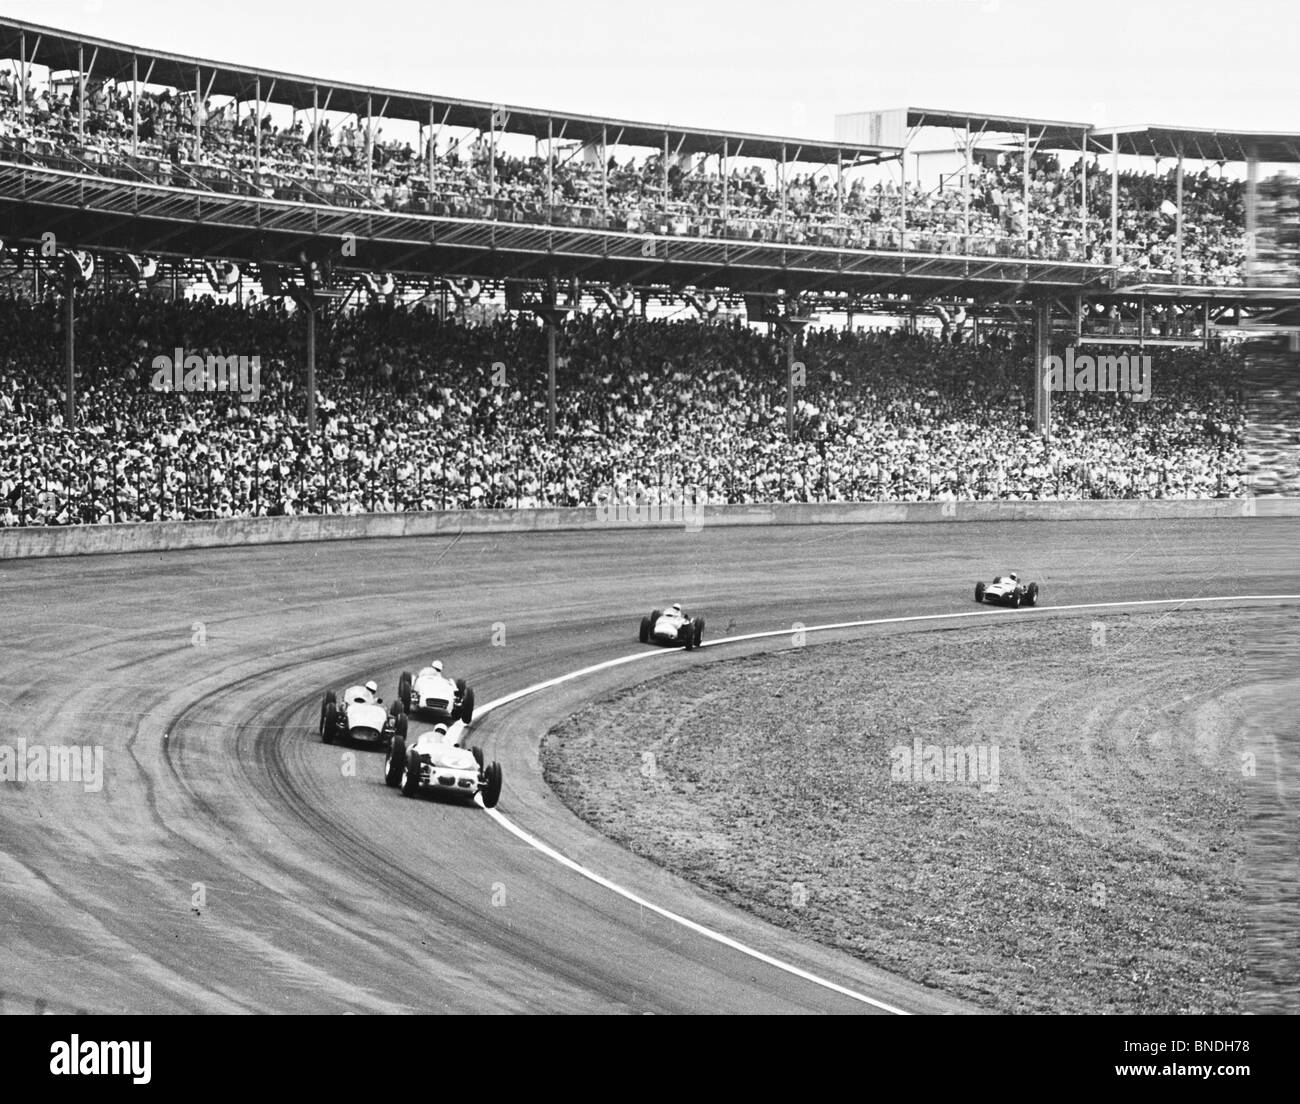 Formula one race cars on a racing track, Indianapolis 500, Indianapolis, Indiana, USA Stock Photo